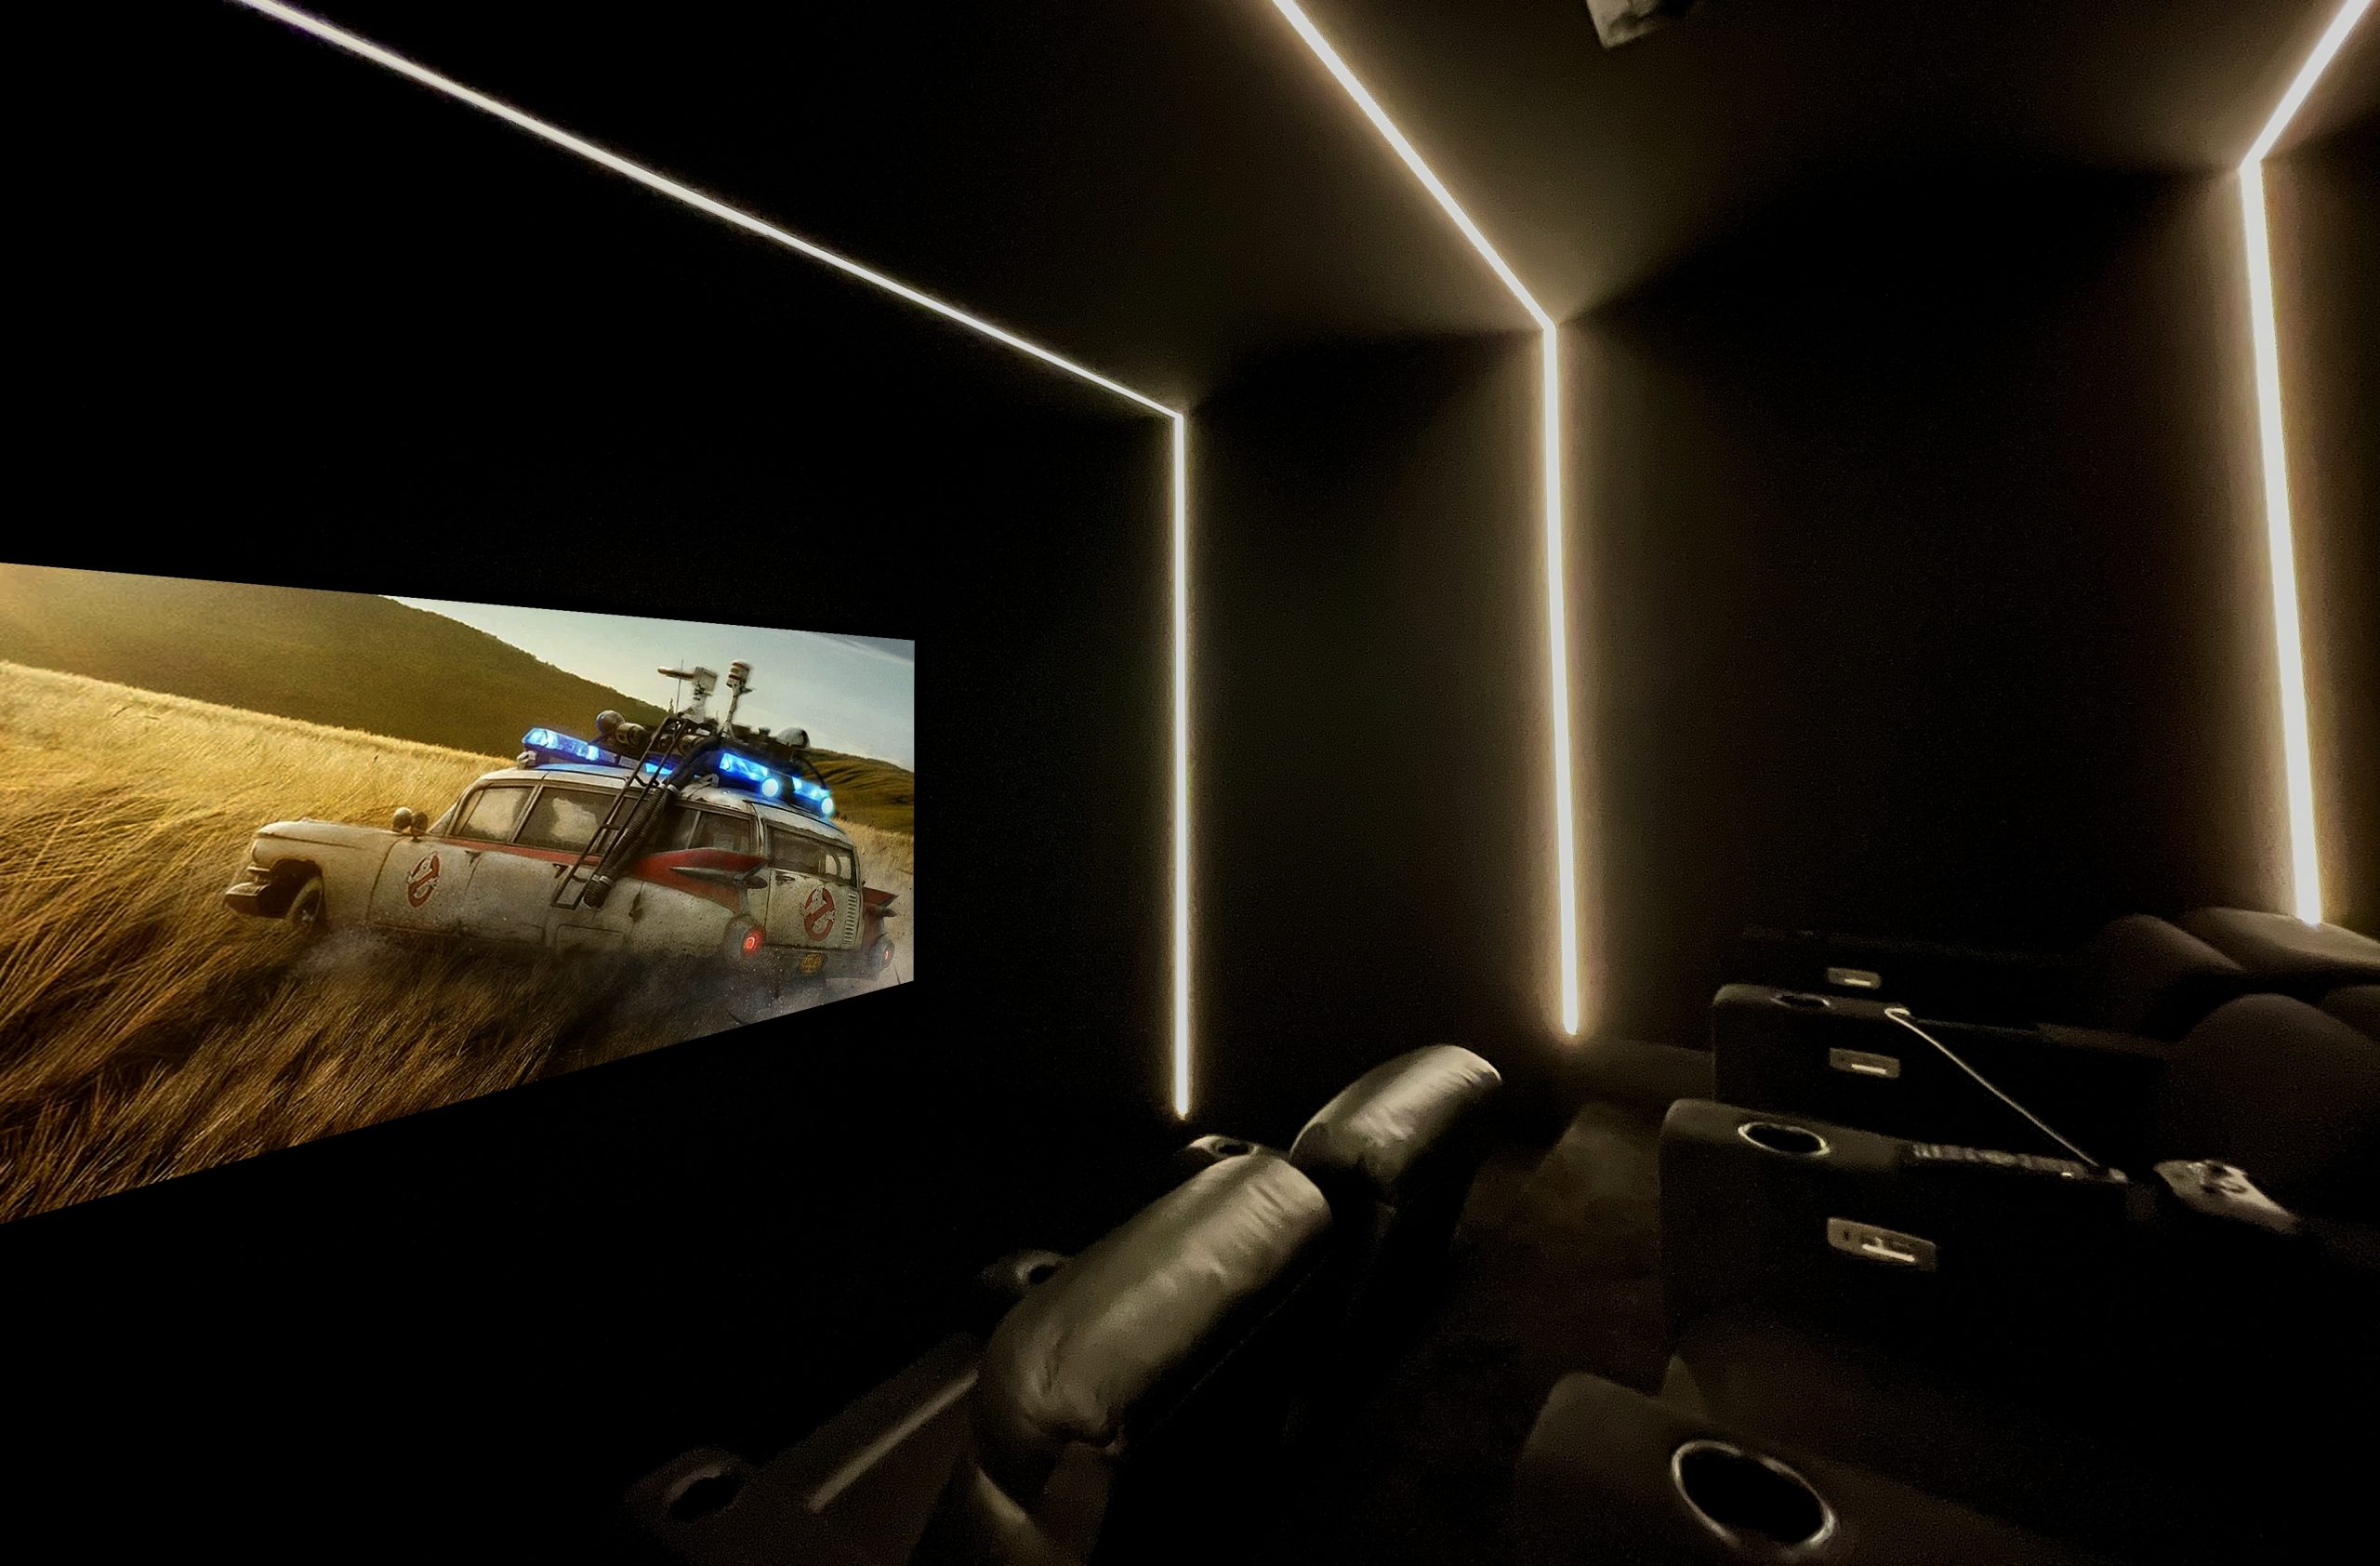 Home cinema with lighting, seating and a film playing.